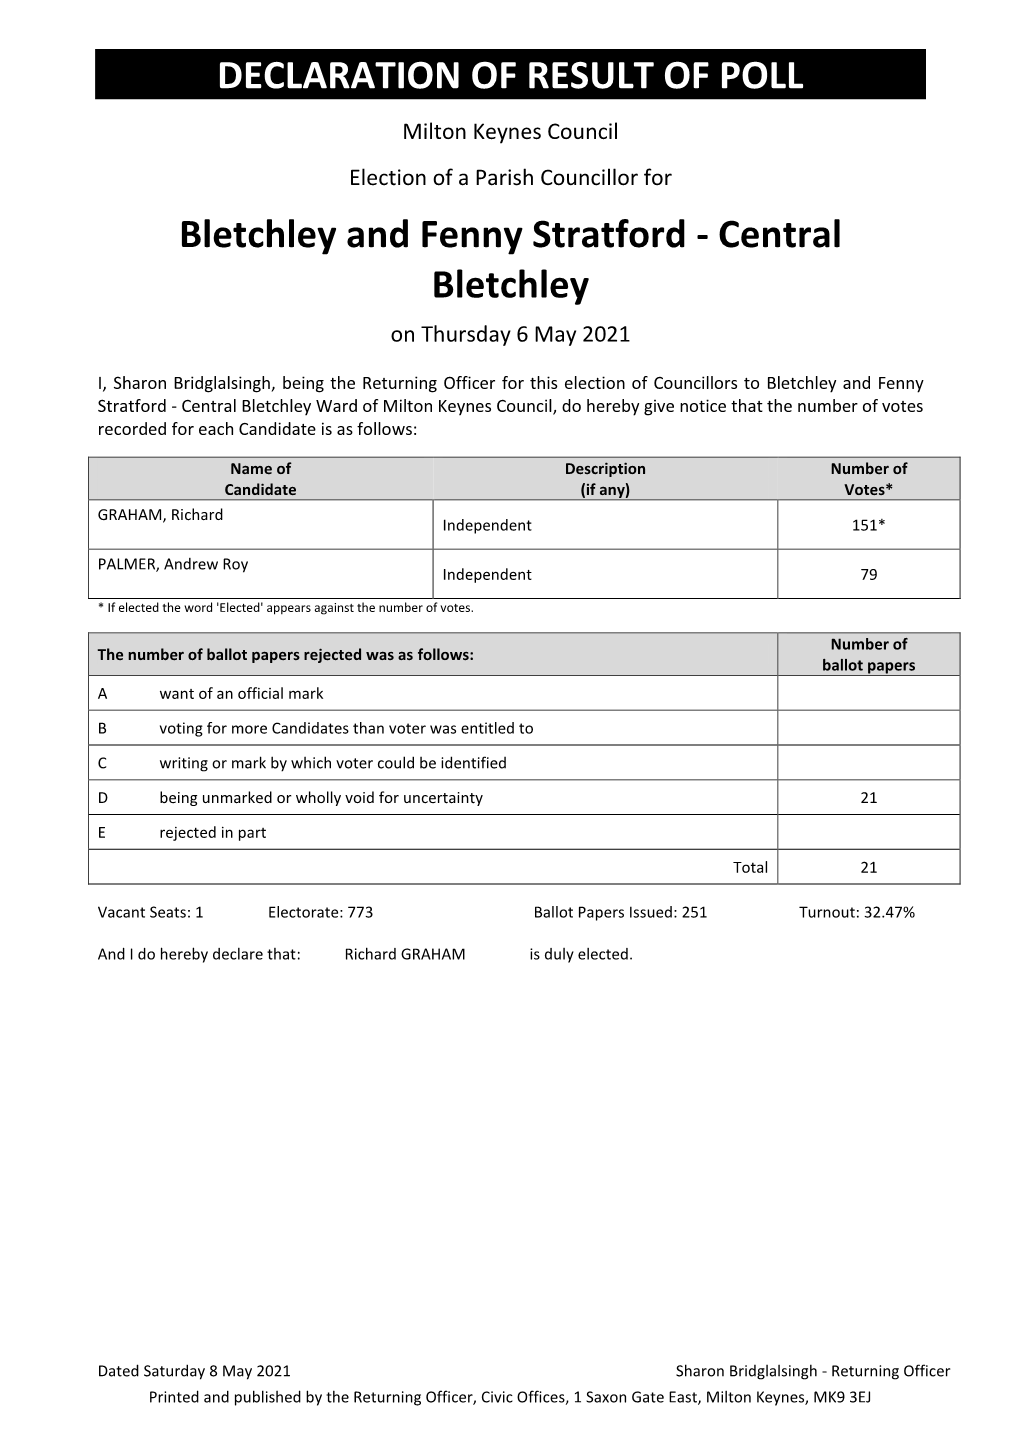 DECLARATION of RESULT of POLL Bletchley and Fenny Stratford